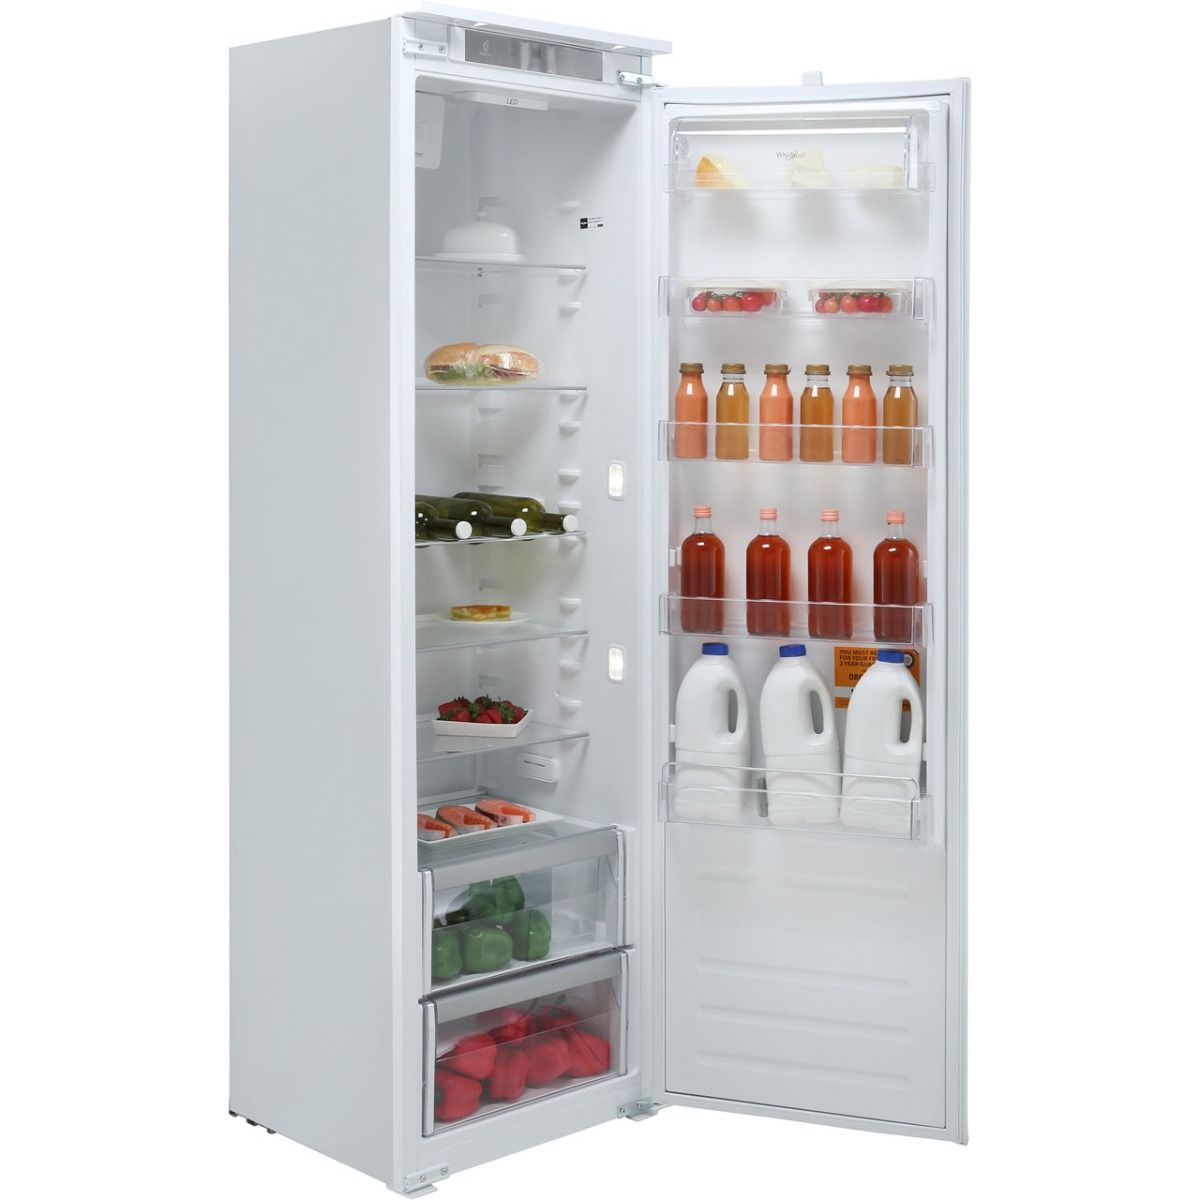 Whirlpool 314L Integrated Fridge - White | ARG180832 from Whirlpool - DID Electrical